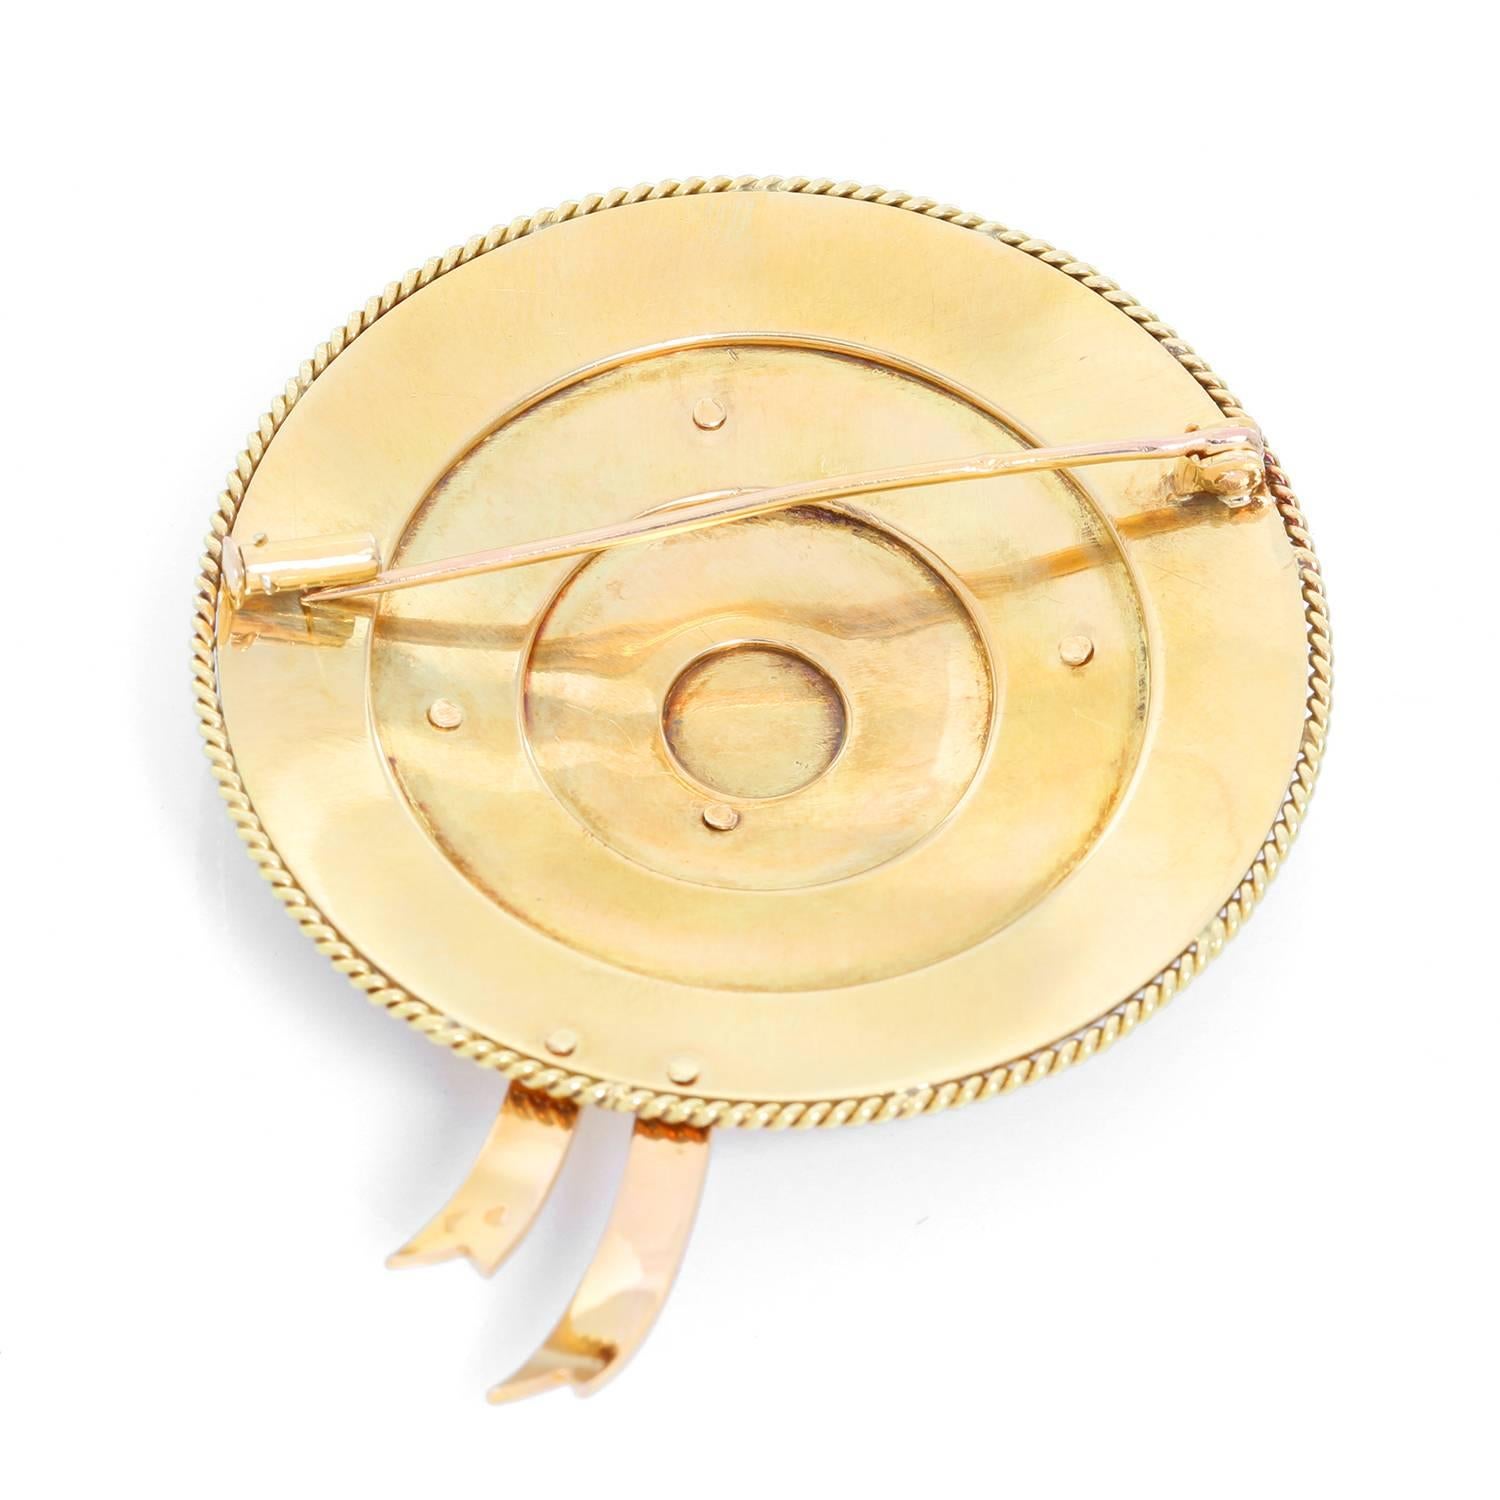 18K Yellow Gold Hat Brooch - . Adorable hat with delicate workmanship on 18K yellow gold. Total weight 27.1 grams. Total length 2.625